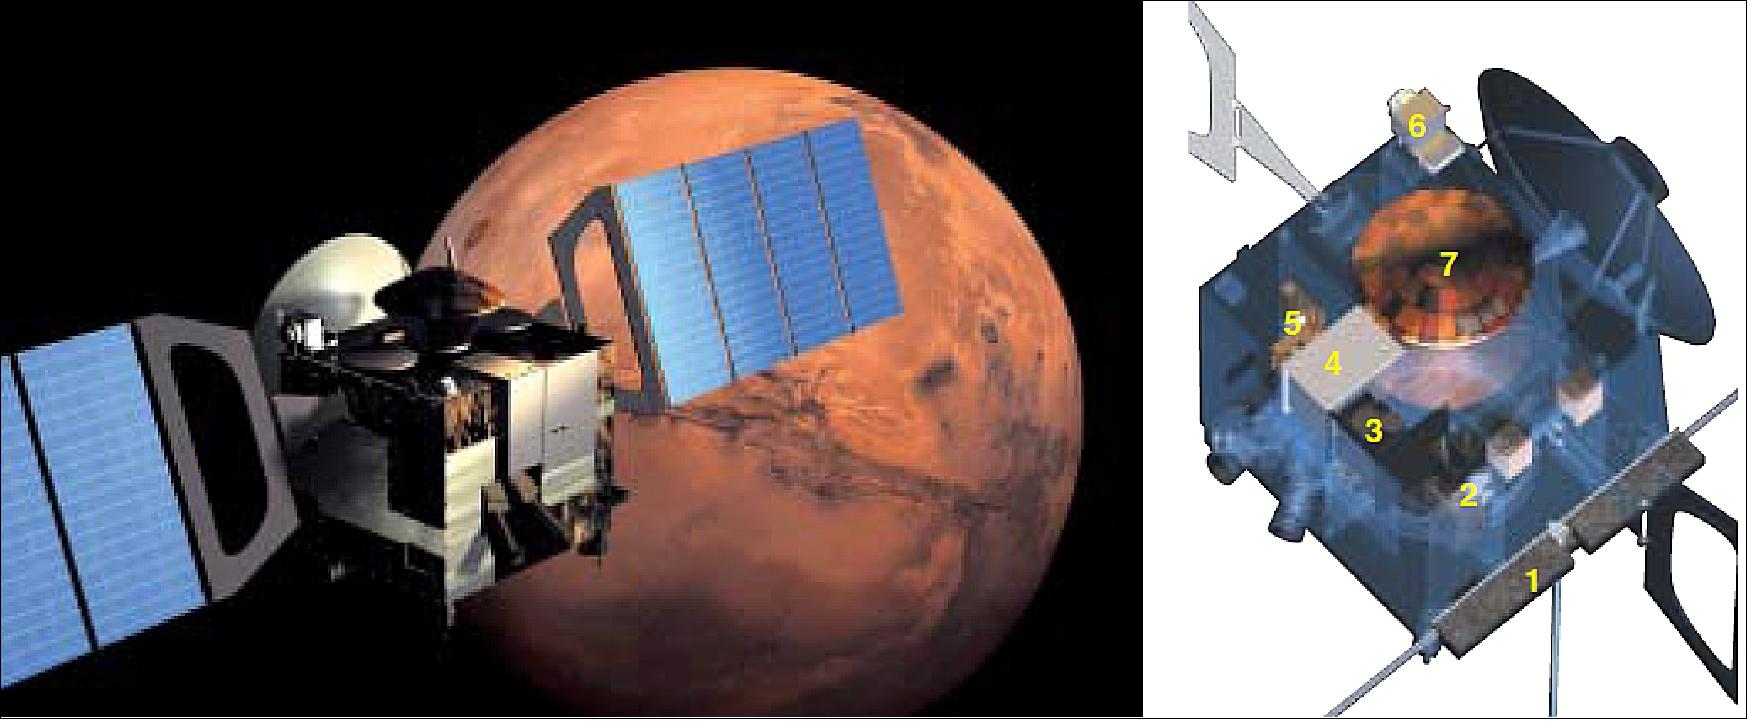 Figure 106: Mars Express with the Beagle 2 capsule still attached. 1: MARSIS. 2: HRSC. 3: OMEGA. 4: PFS. 5: SPICAM. 6: ASPERA. 7: Beagle 2. (MaRS requires no dedicated hardware), image credit: ESA